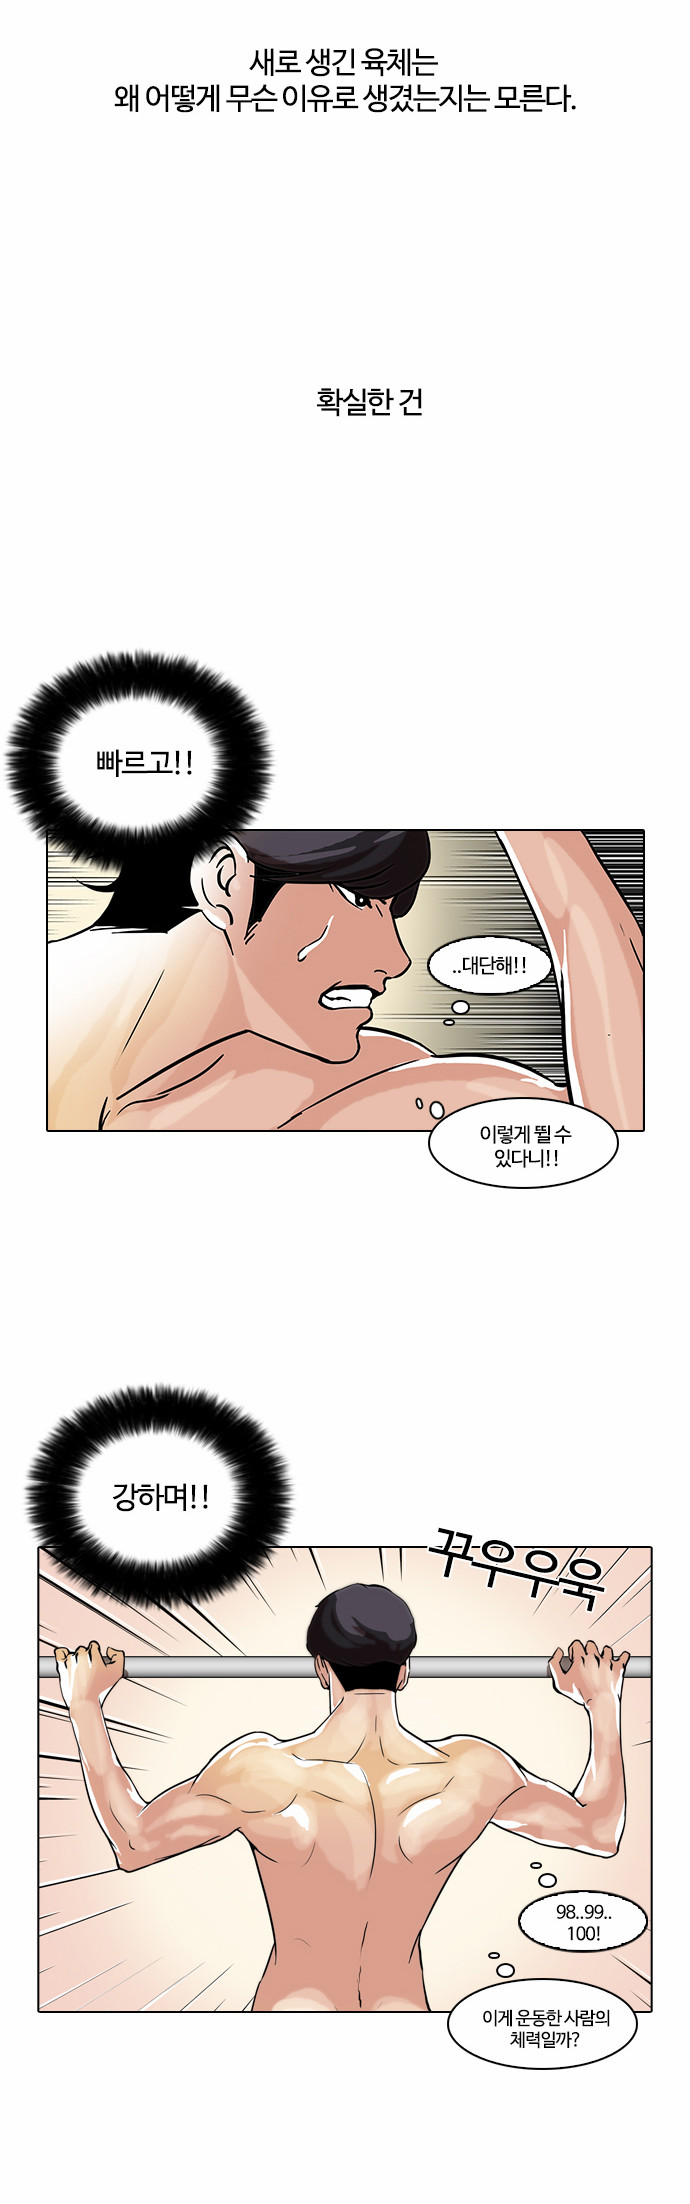 Lookism - Chapter 39 - Page 2